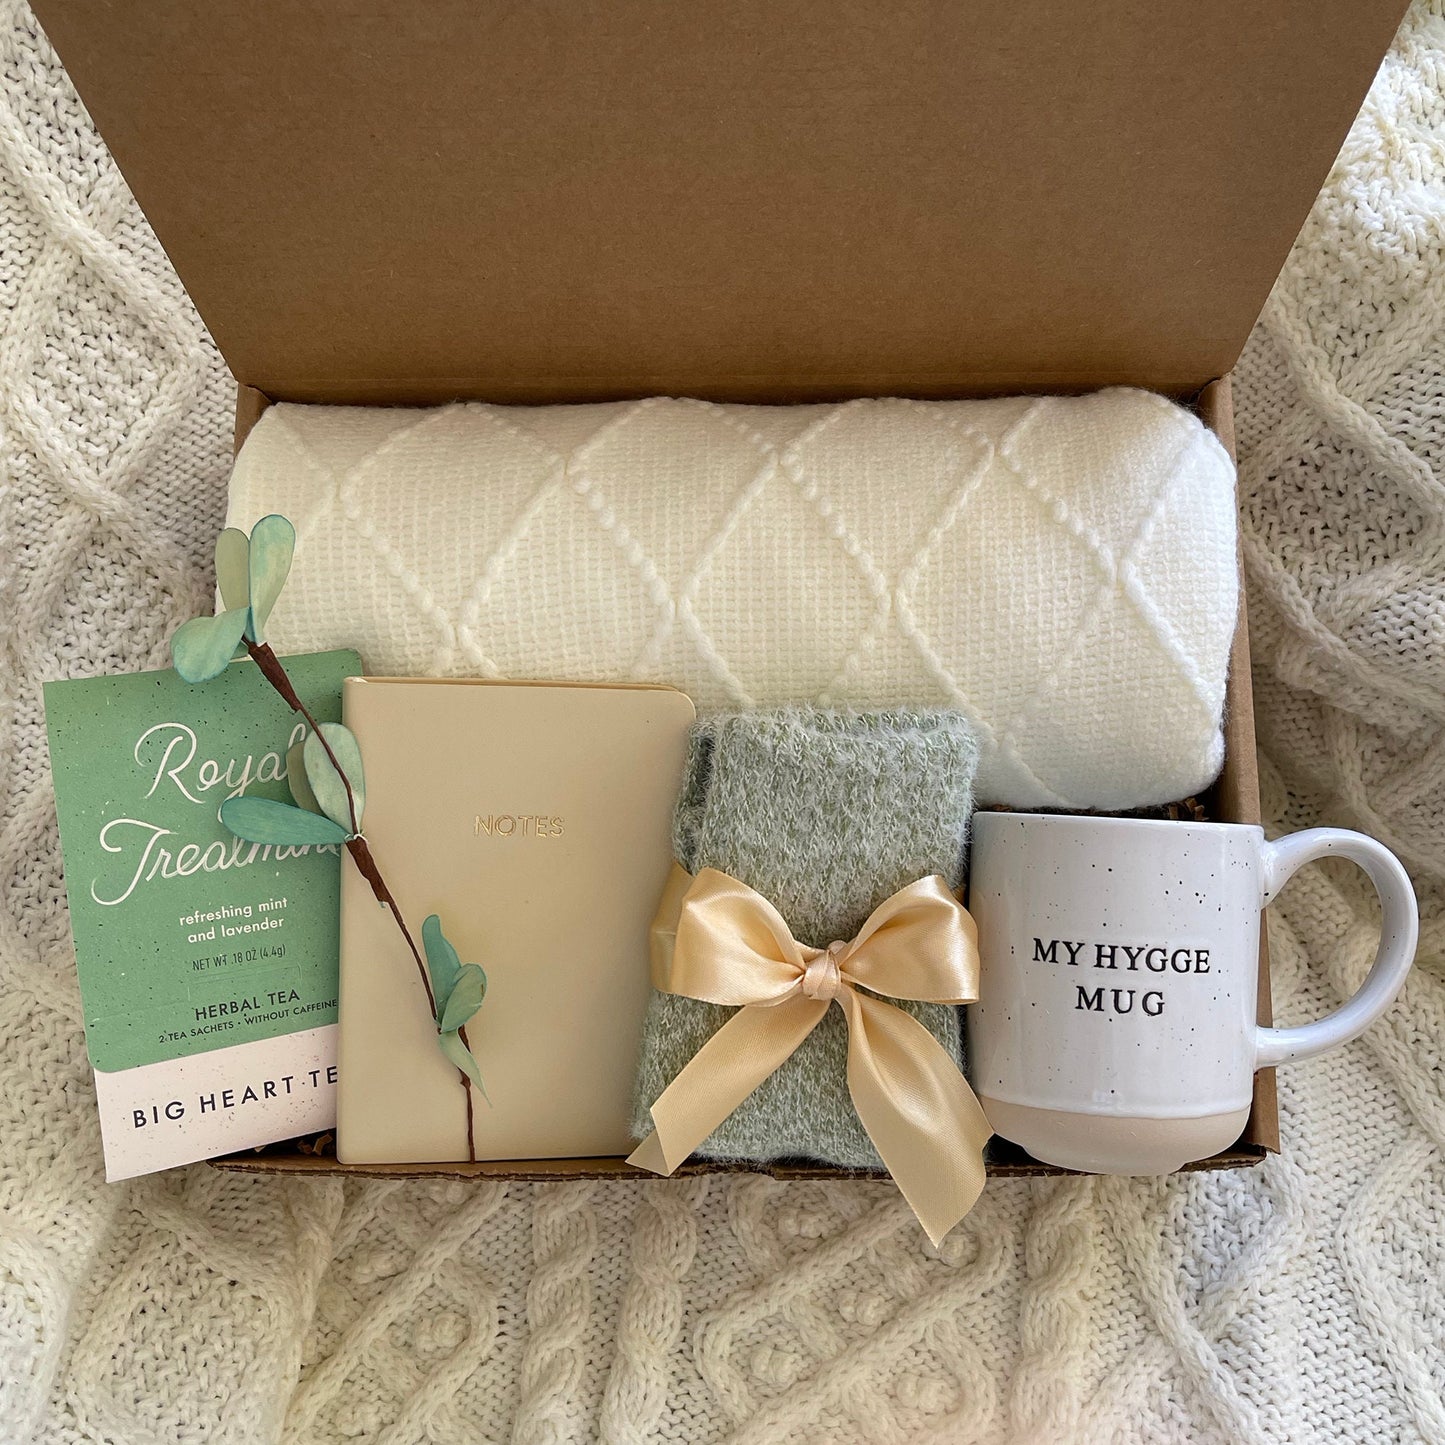 Self Care Spa Gift Box - Handmade Gift with Personalized Options Available.